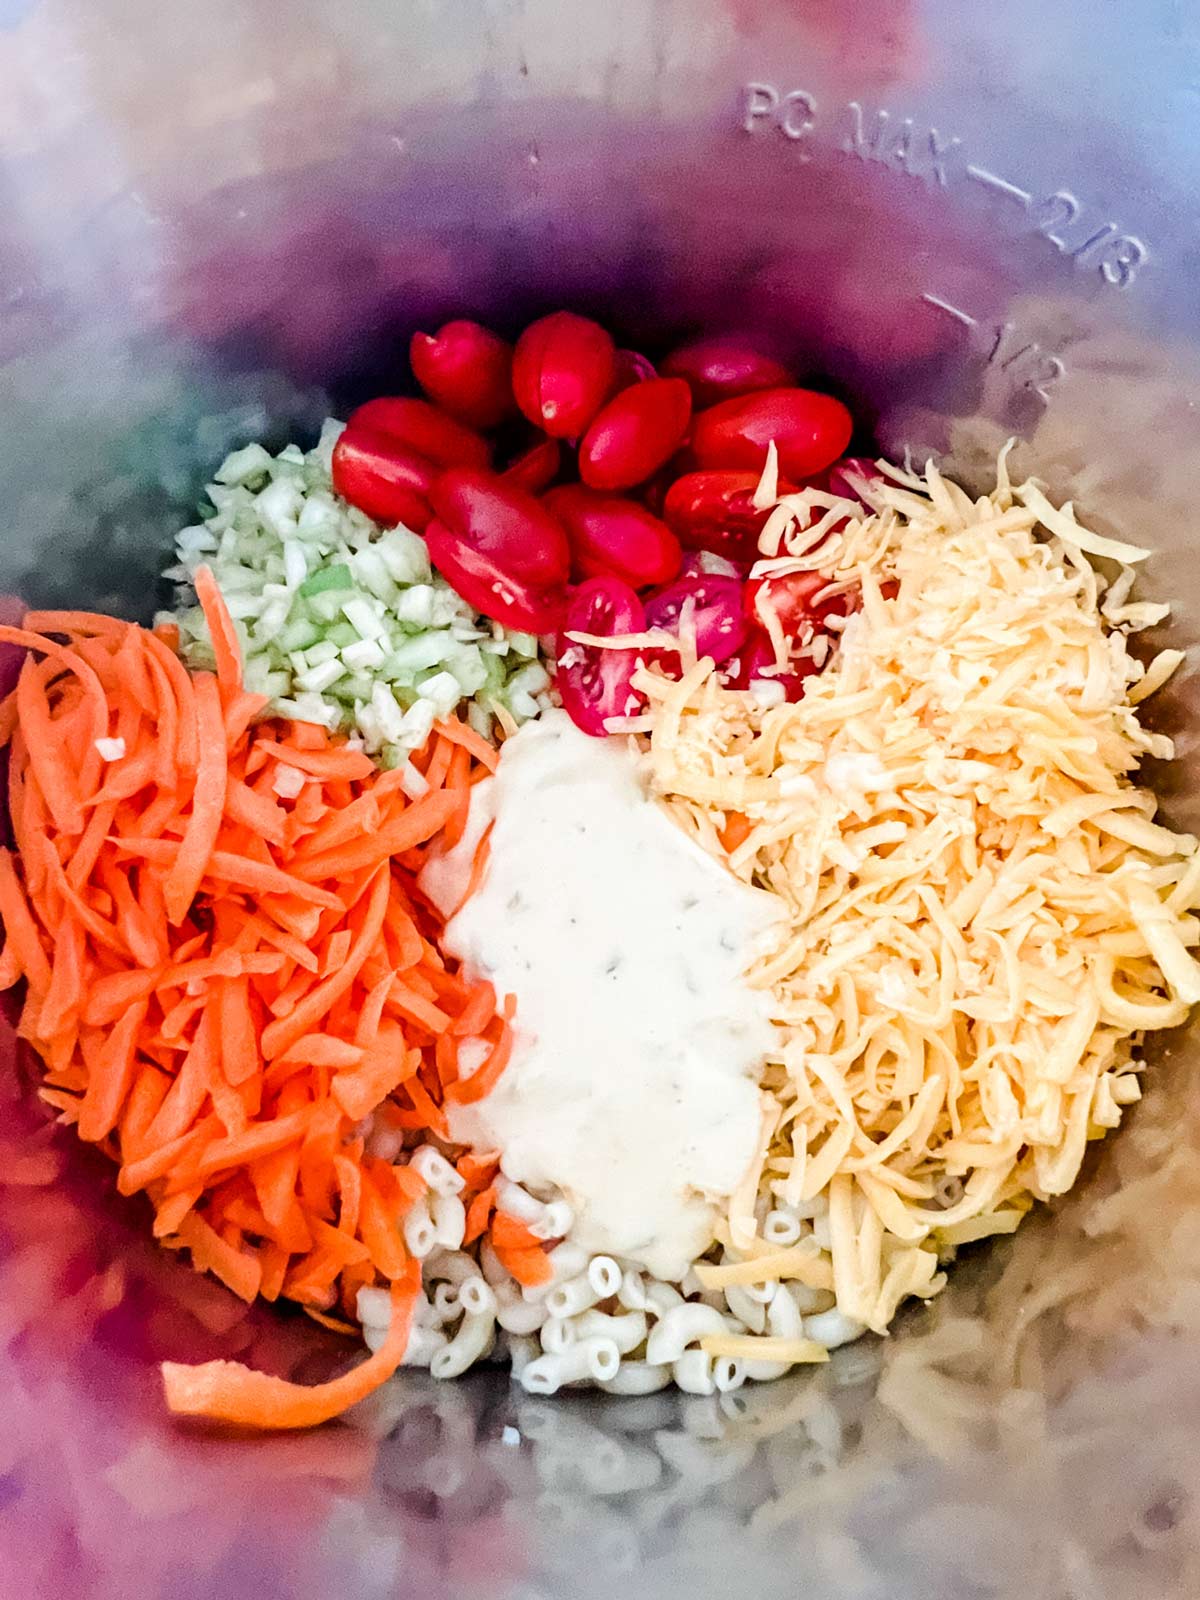 Instant Pot macaroni salad ingredients in the inner pot of an Instant Pot ready to be tossed together.